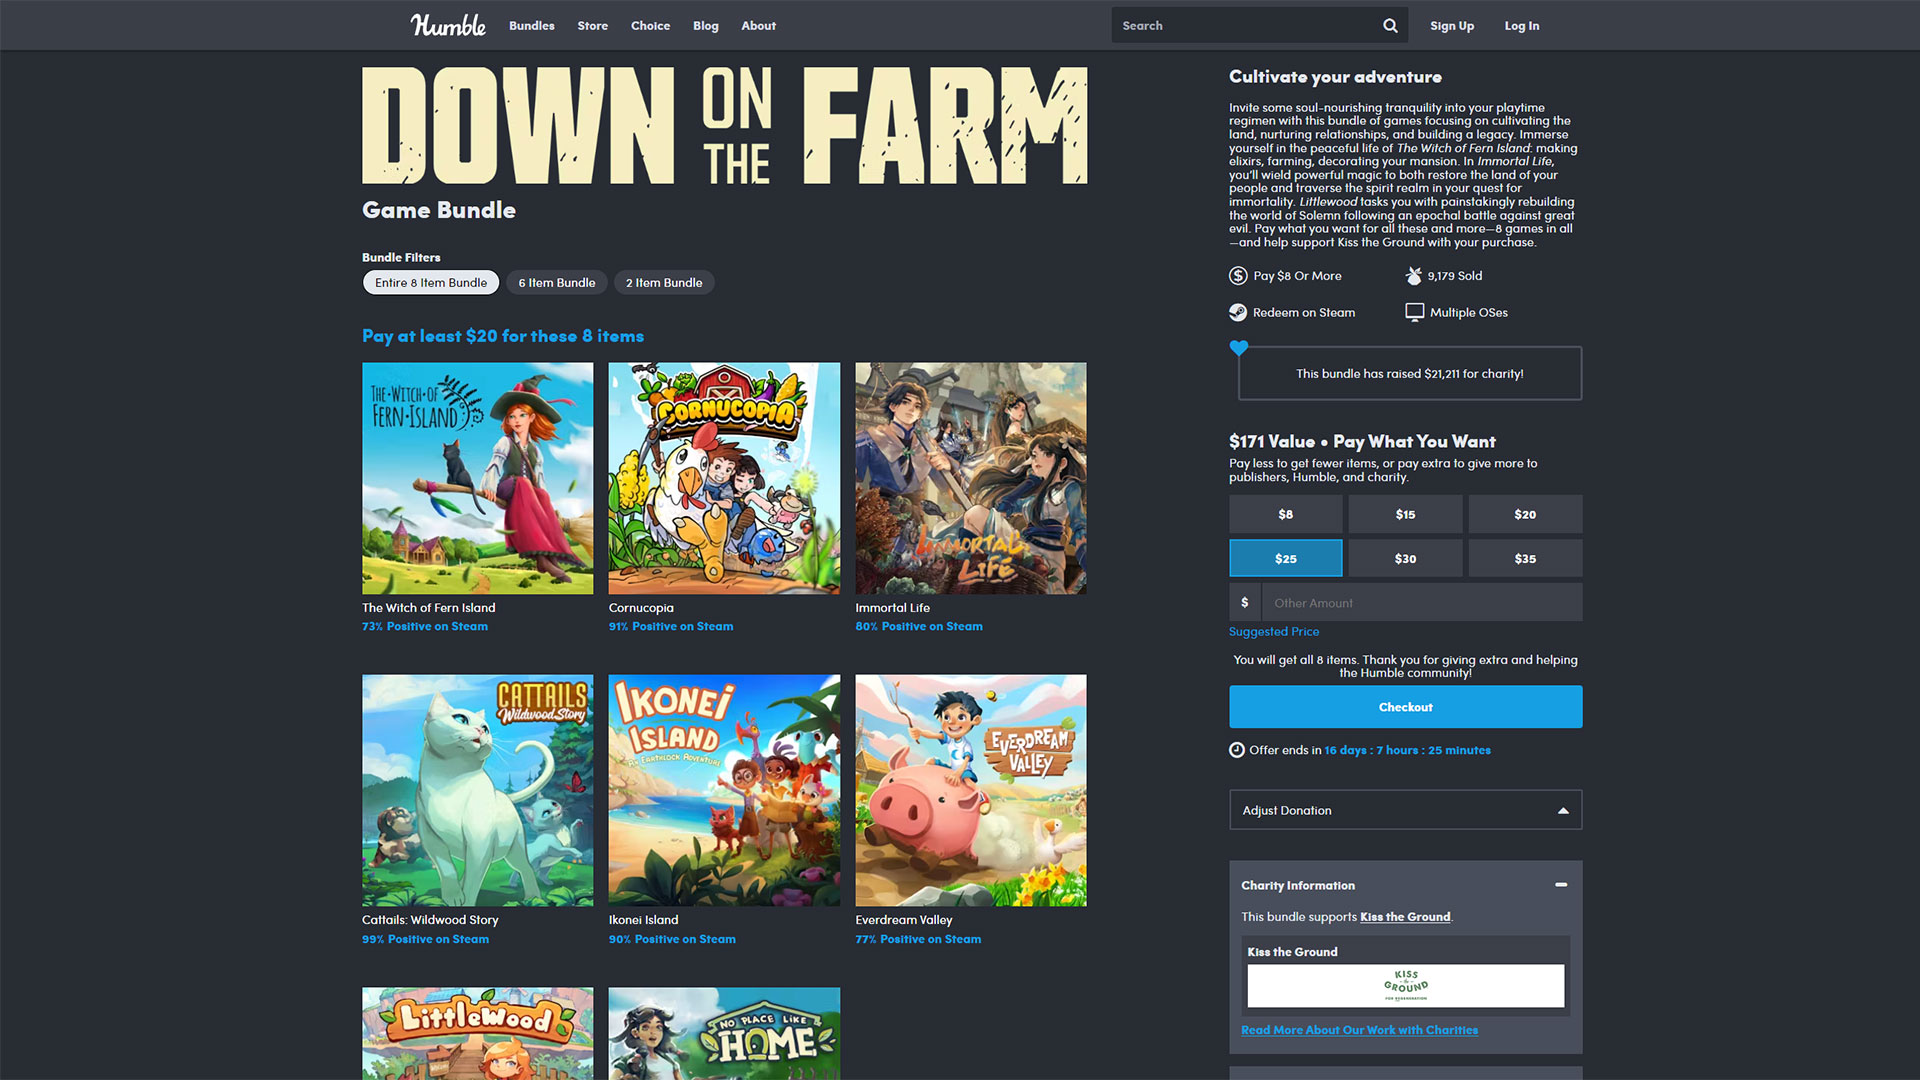 The Humble Down on the Farm game bundle is available for $20